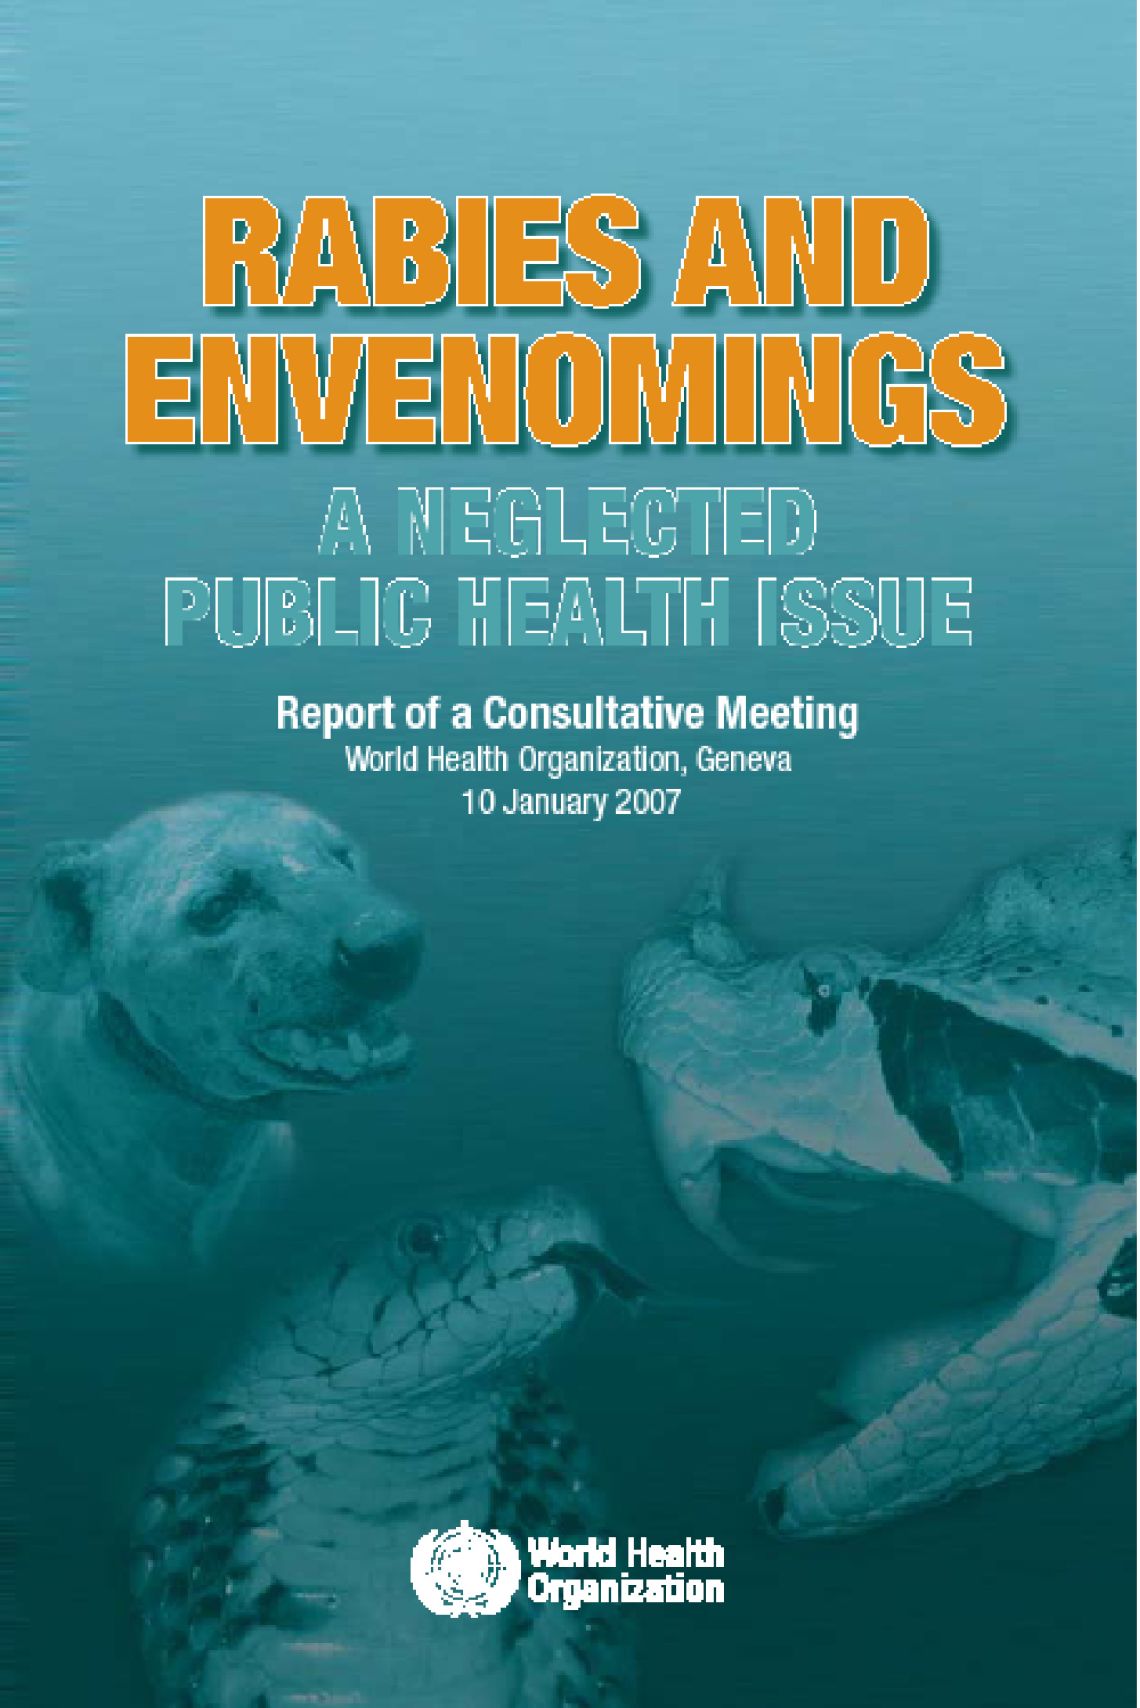 Rabies and Envenomings A Neglected Public Health Issue Report of a Consultative Meeting WHO Geneva 10 January 2007